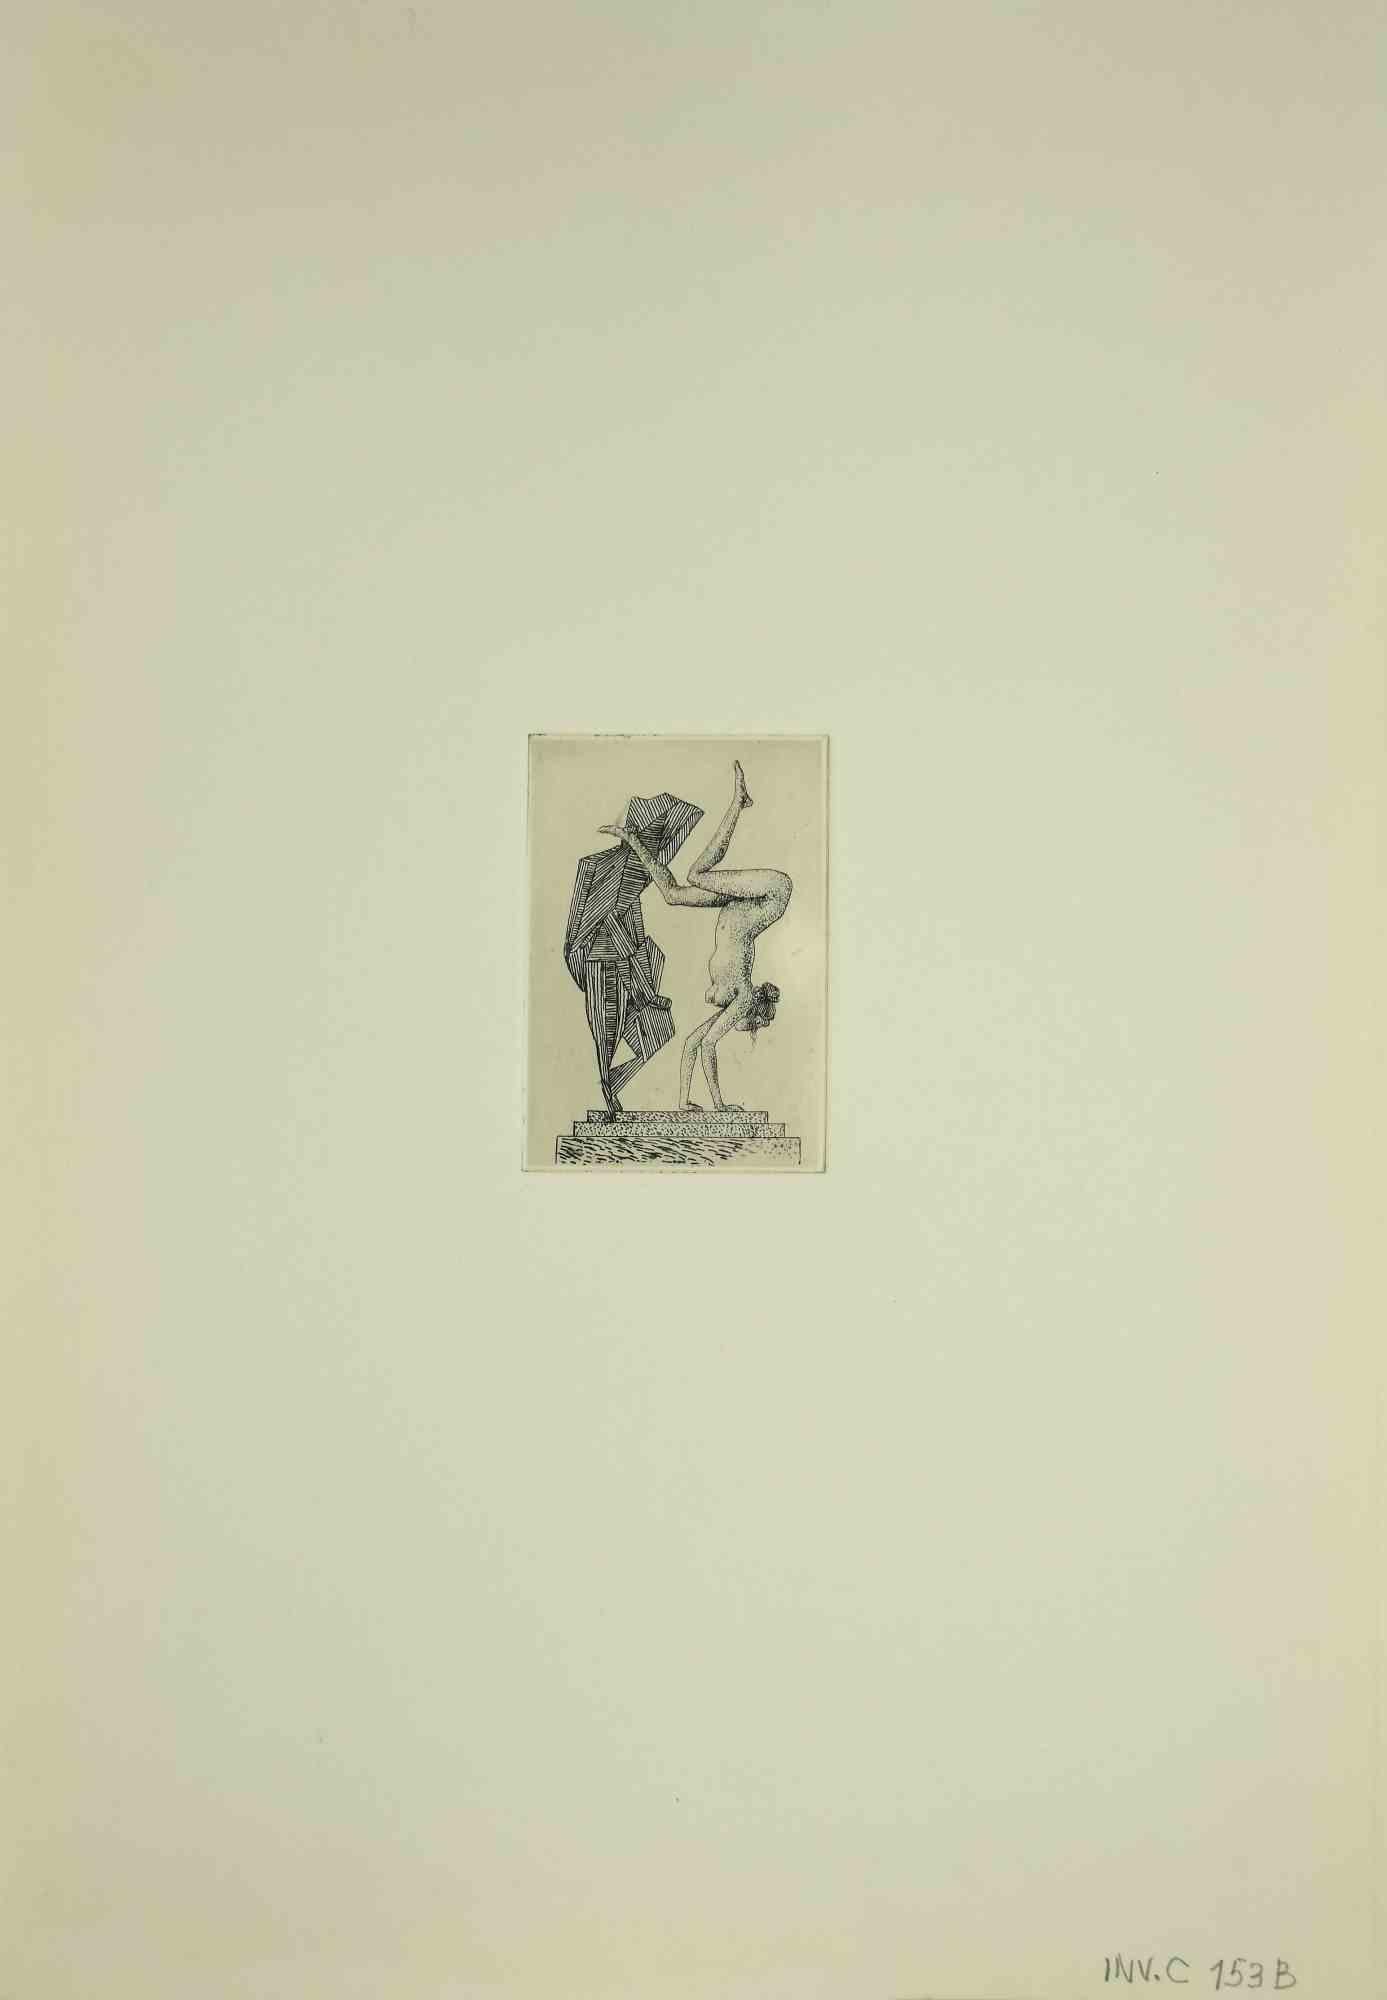 The Somersault Nude - Original Etching by Leo Guida - 1970